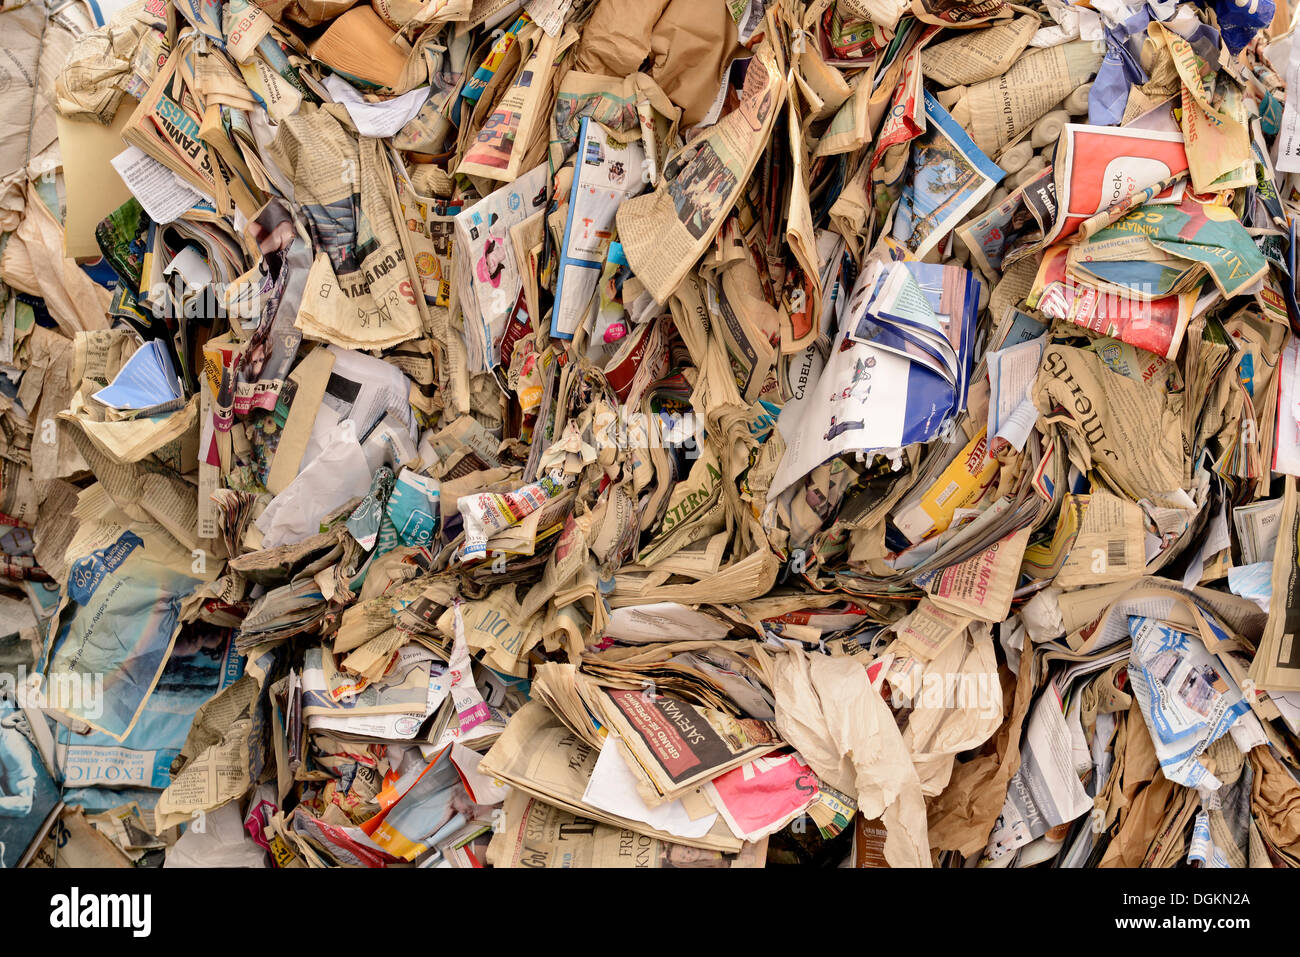 Bale of magazines and newspaper at the recycling collection facility in Enterprise, Oregon. Stock Photo